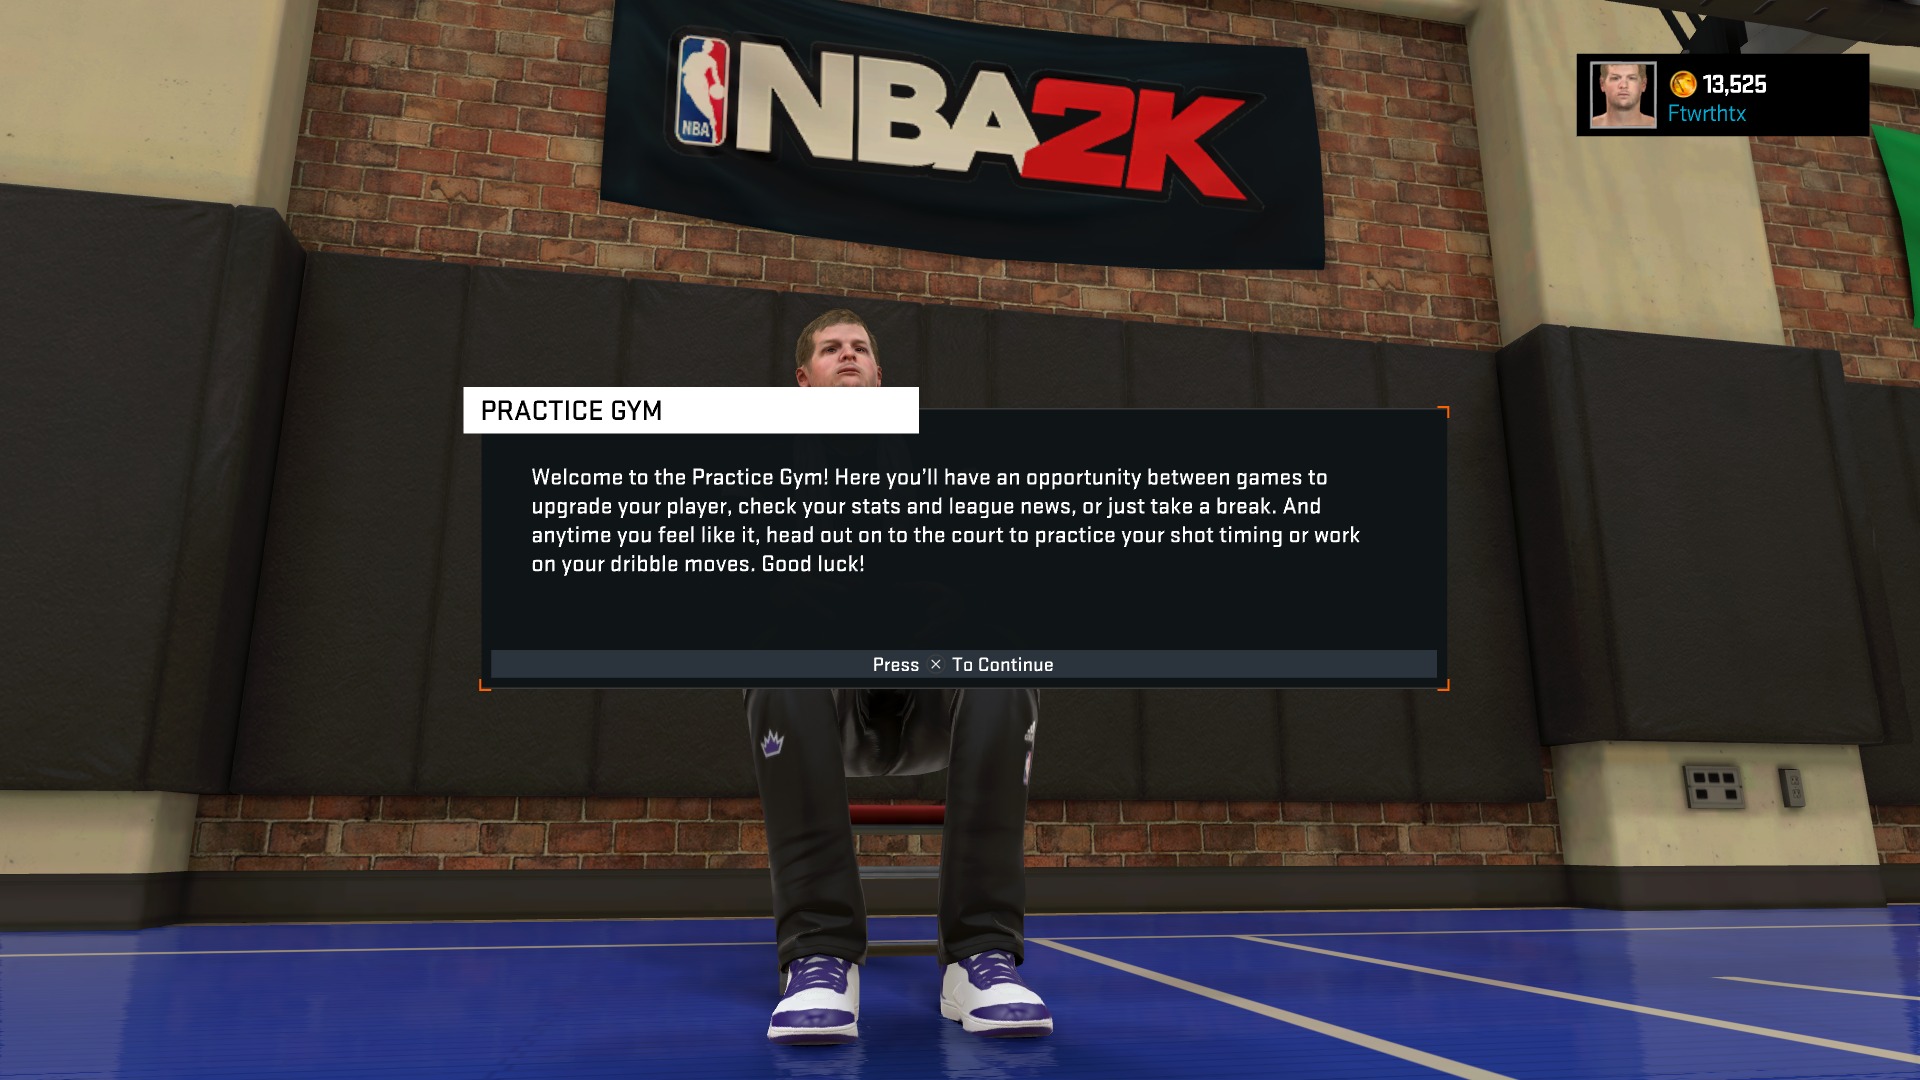 NBA 2K15 Practice gym. Just press on the left stick to get out on the floor.